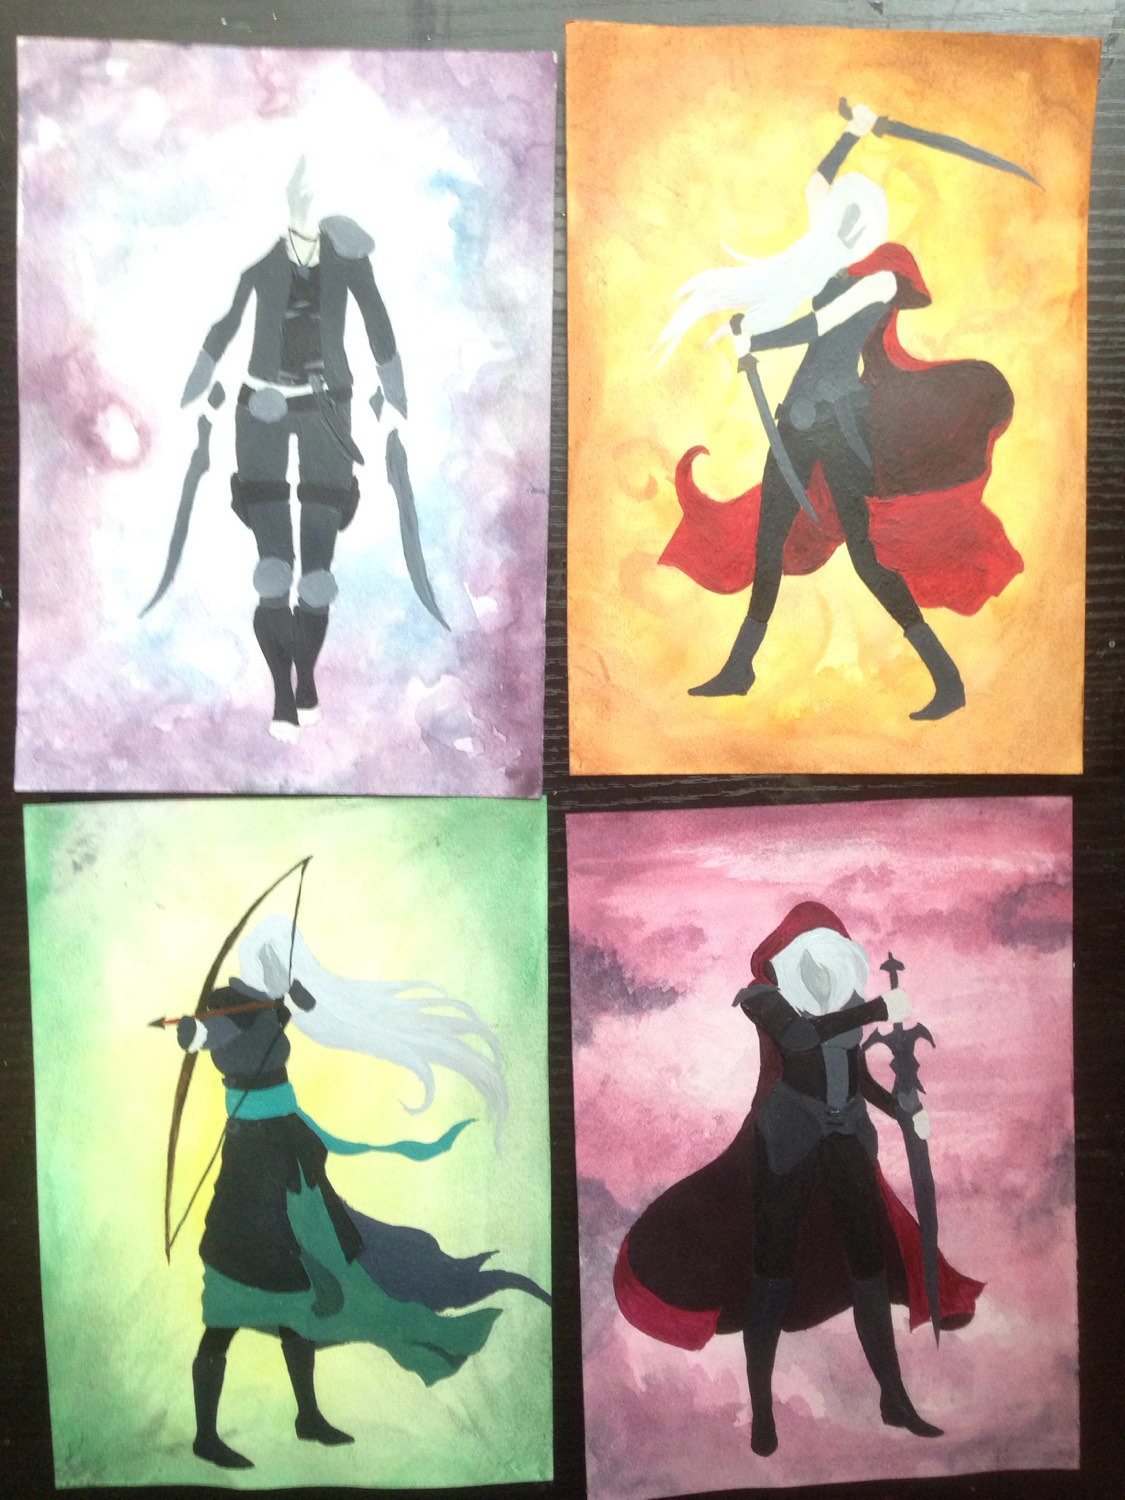 Minimalist Throne of Glass Covers